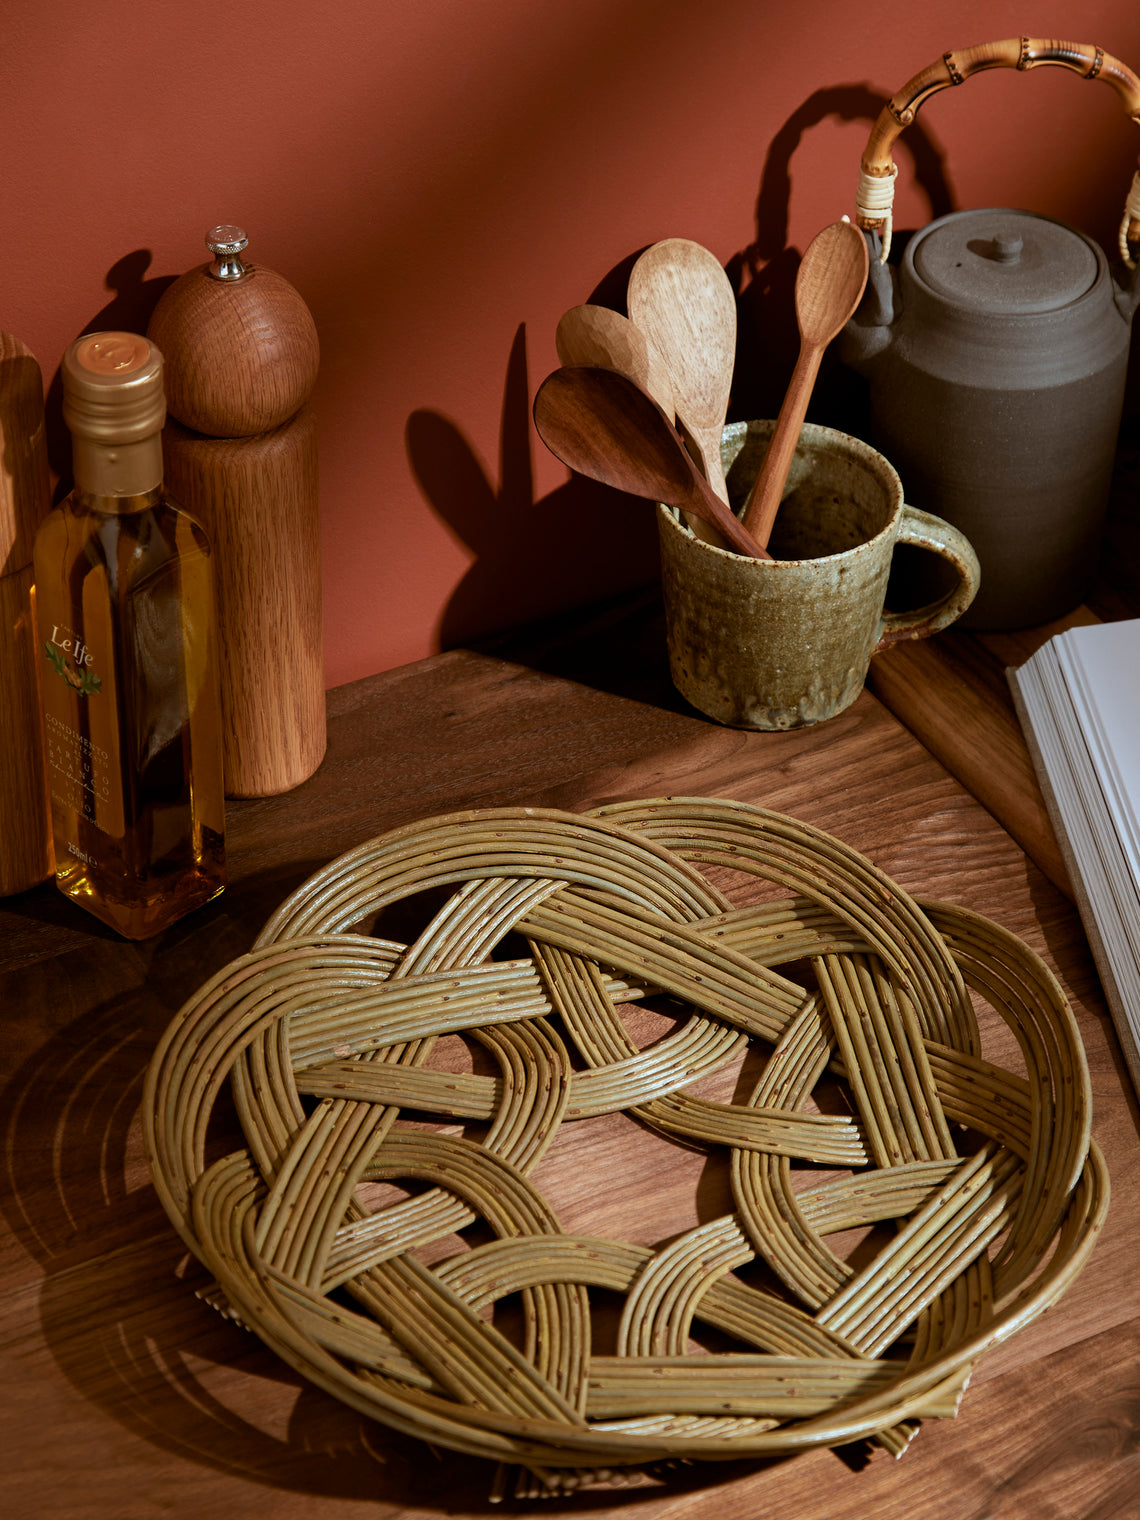 Rachel Bower - Handwoven Willow Large Celtic Knot Tray -  - ABASK